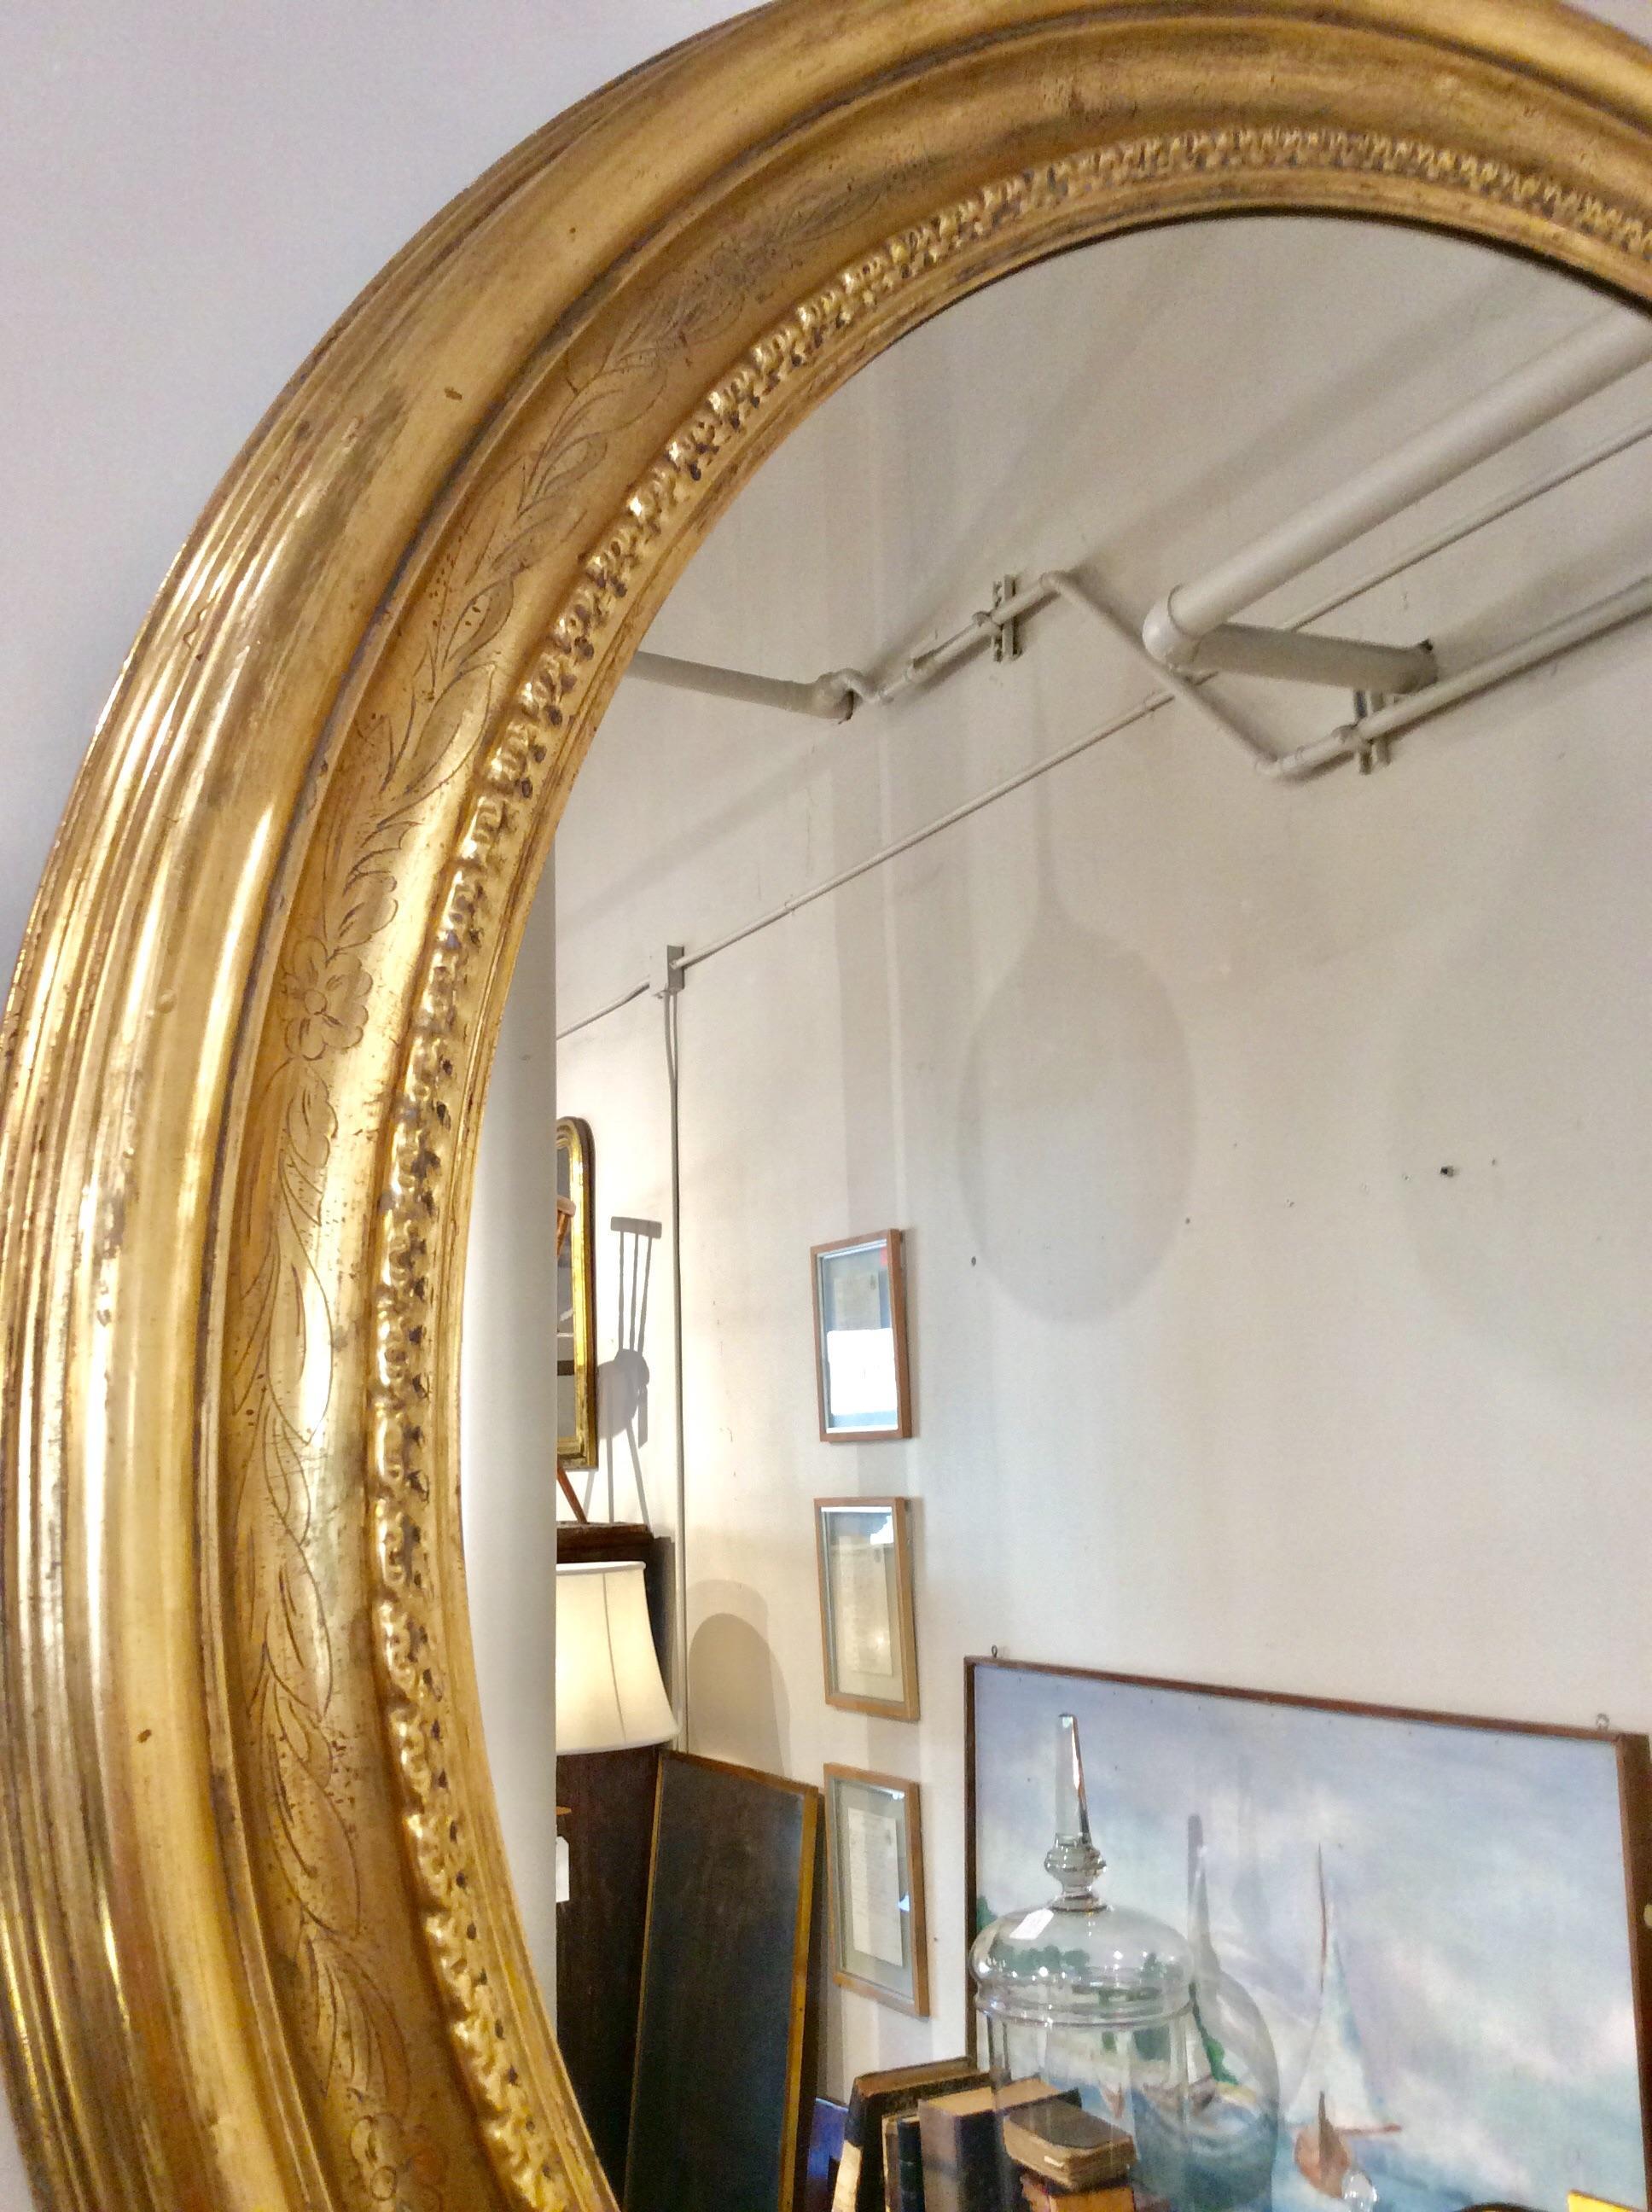 Found in France this giltwood round mirror is from the early 20th century. The large mirror features a circular giltwood frame etched with flowers and leaves. Measuring 64